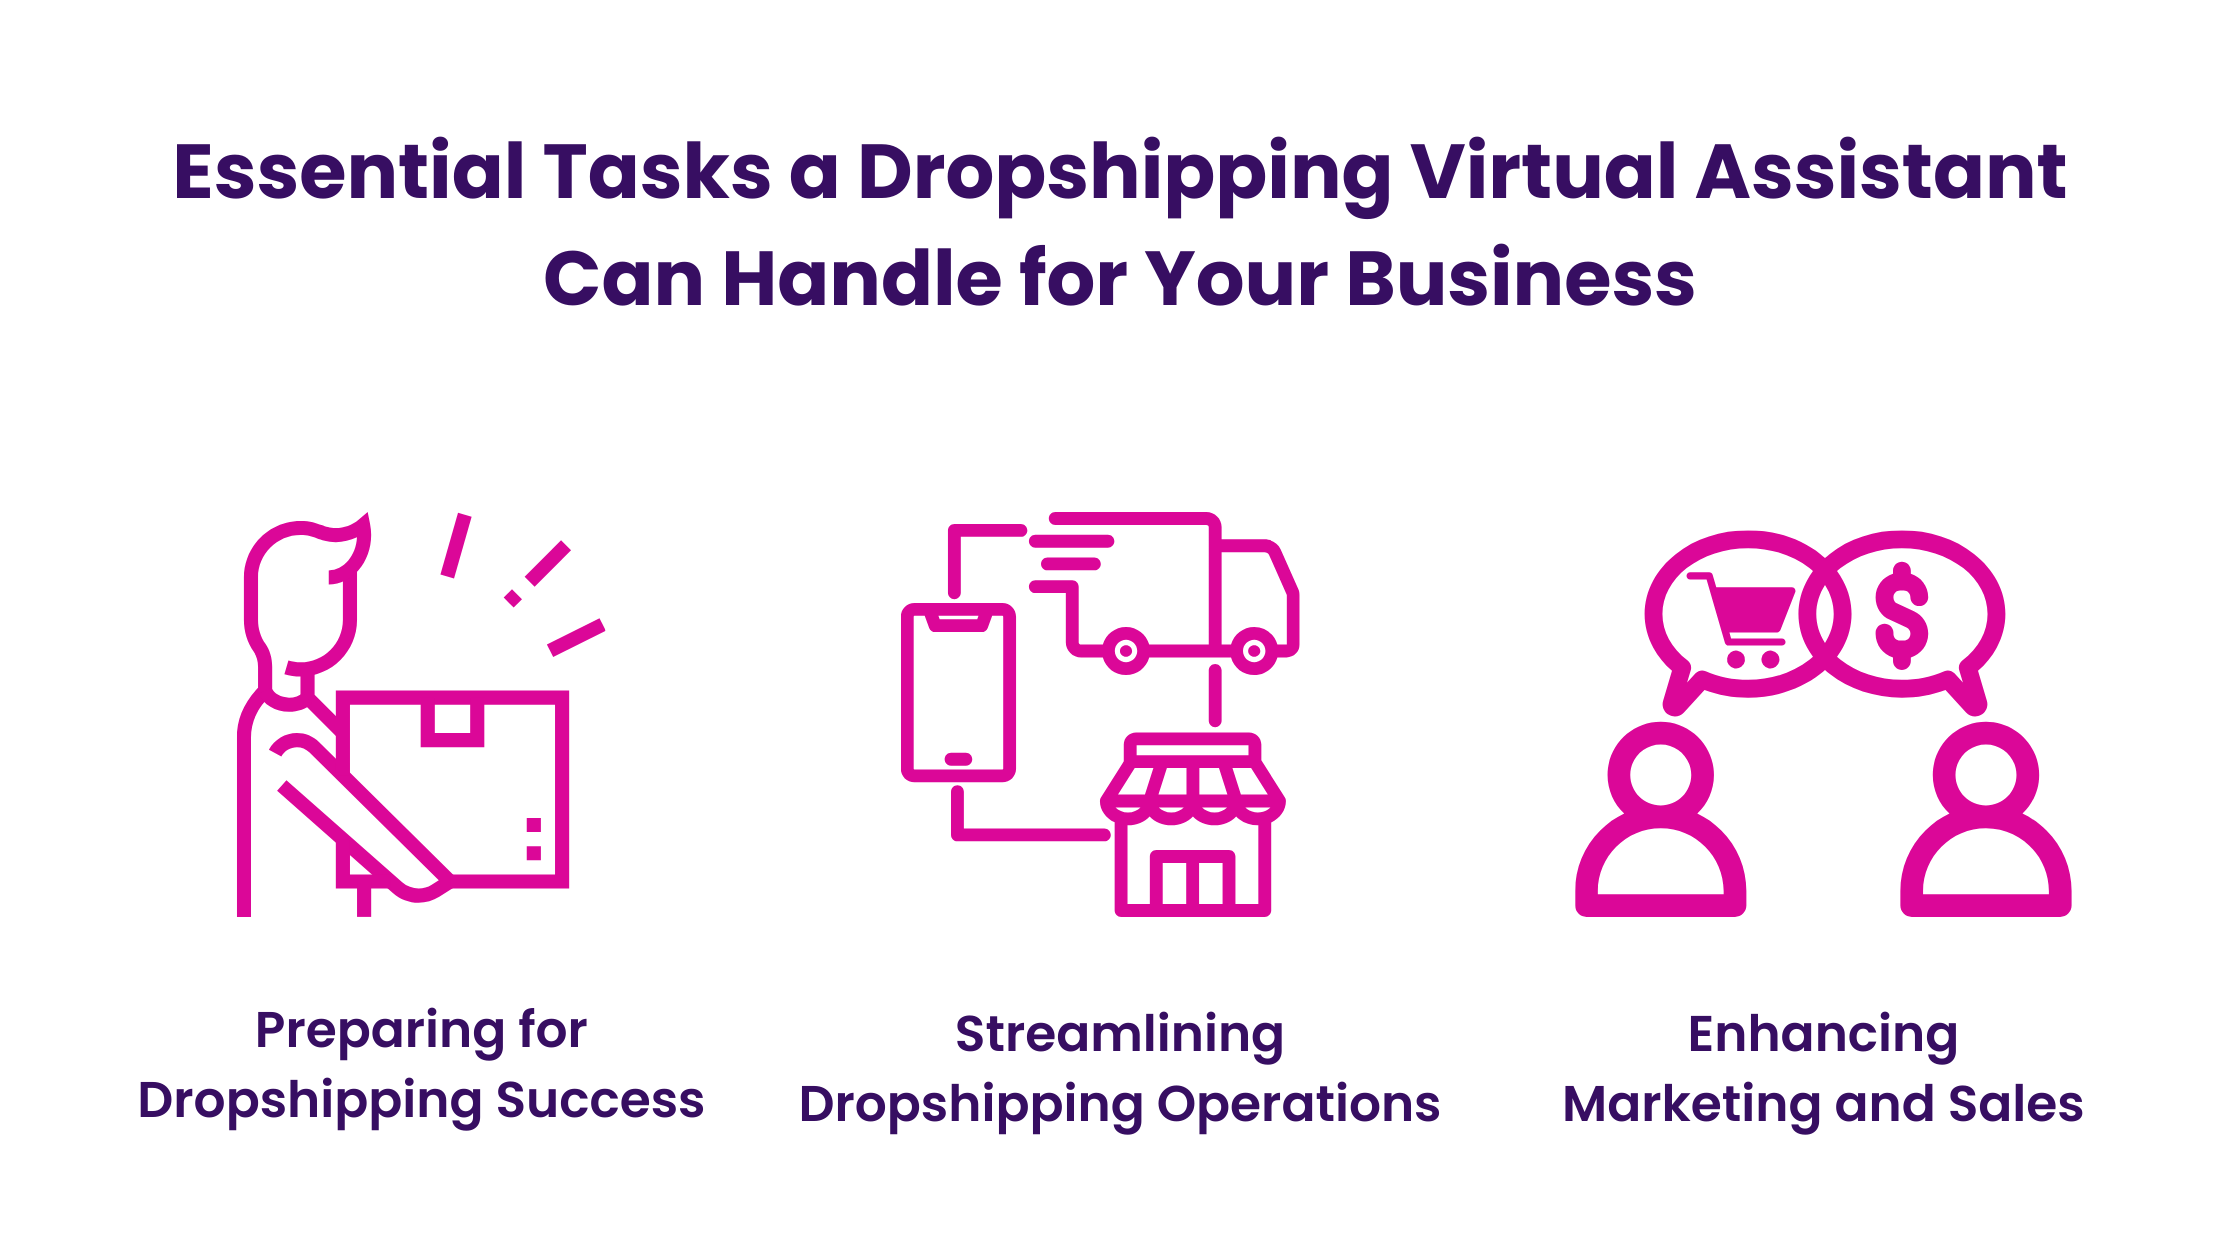 Essential Tasks a Dropshipping Virtual Assistant Can Handle for Your Business